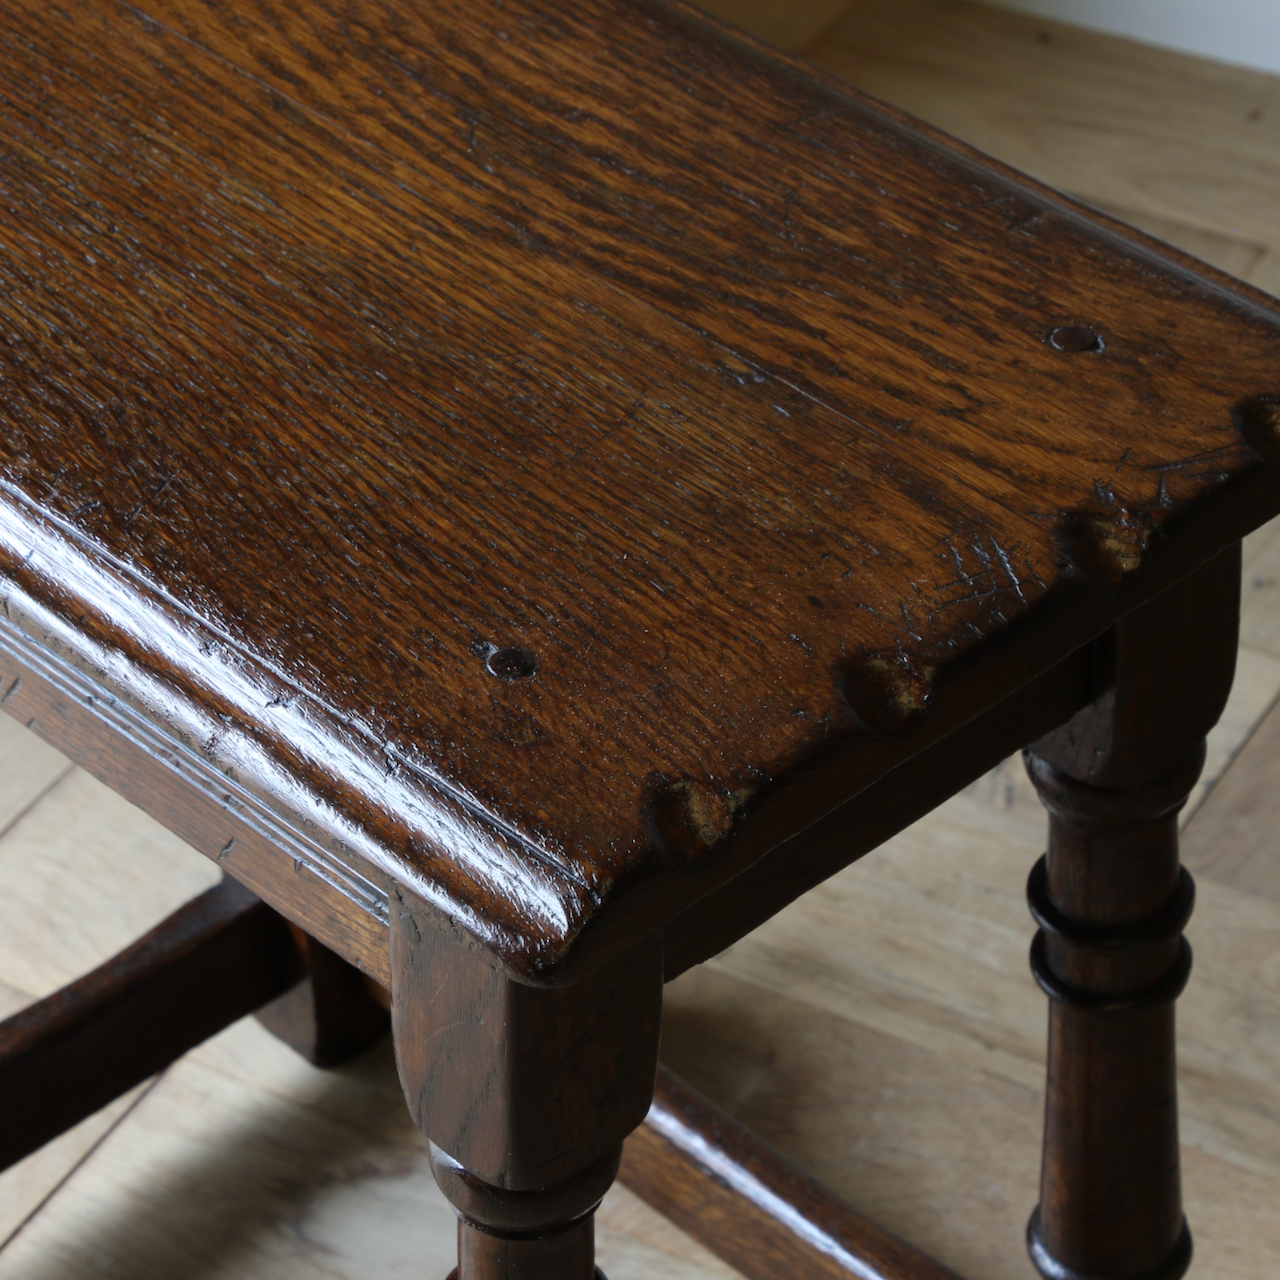 Old English Oak Jointed Stool